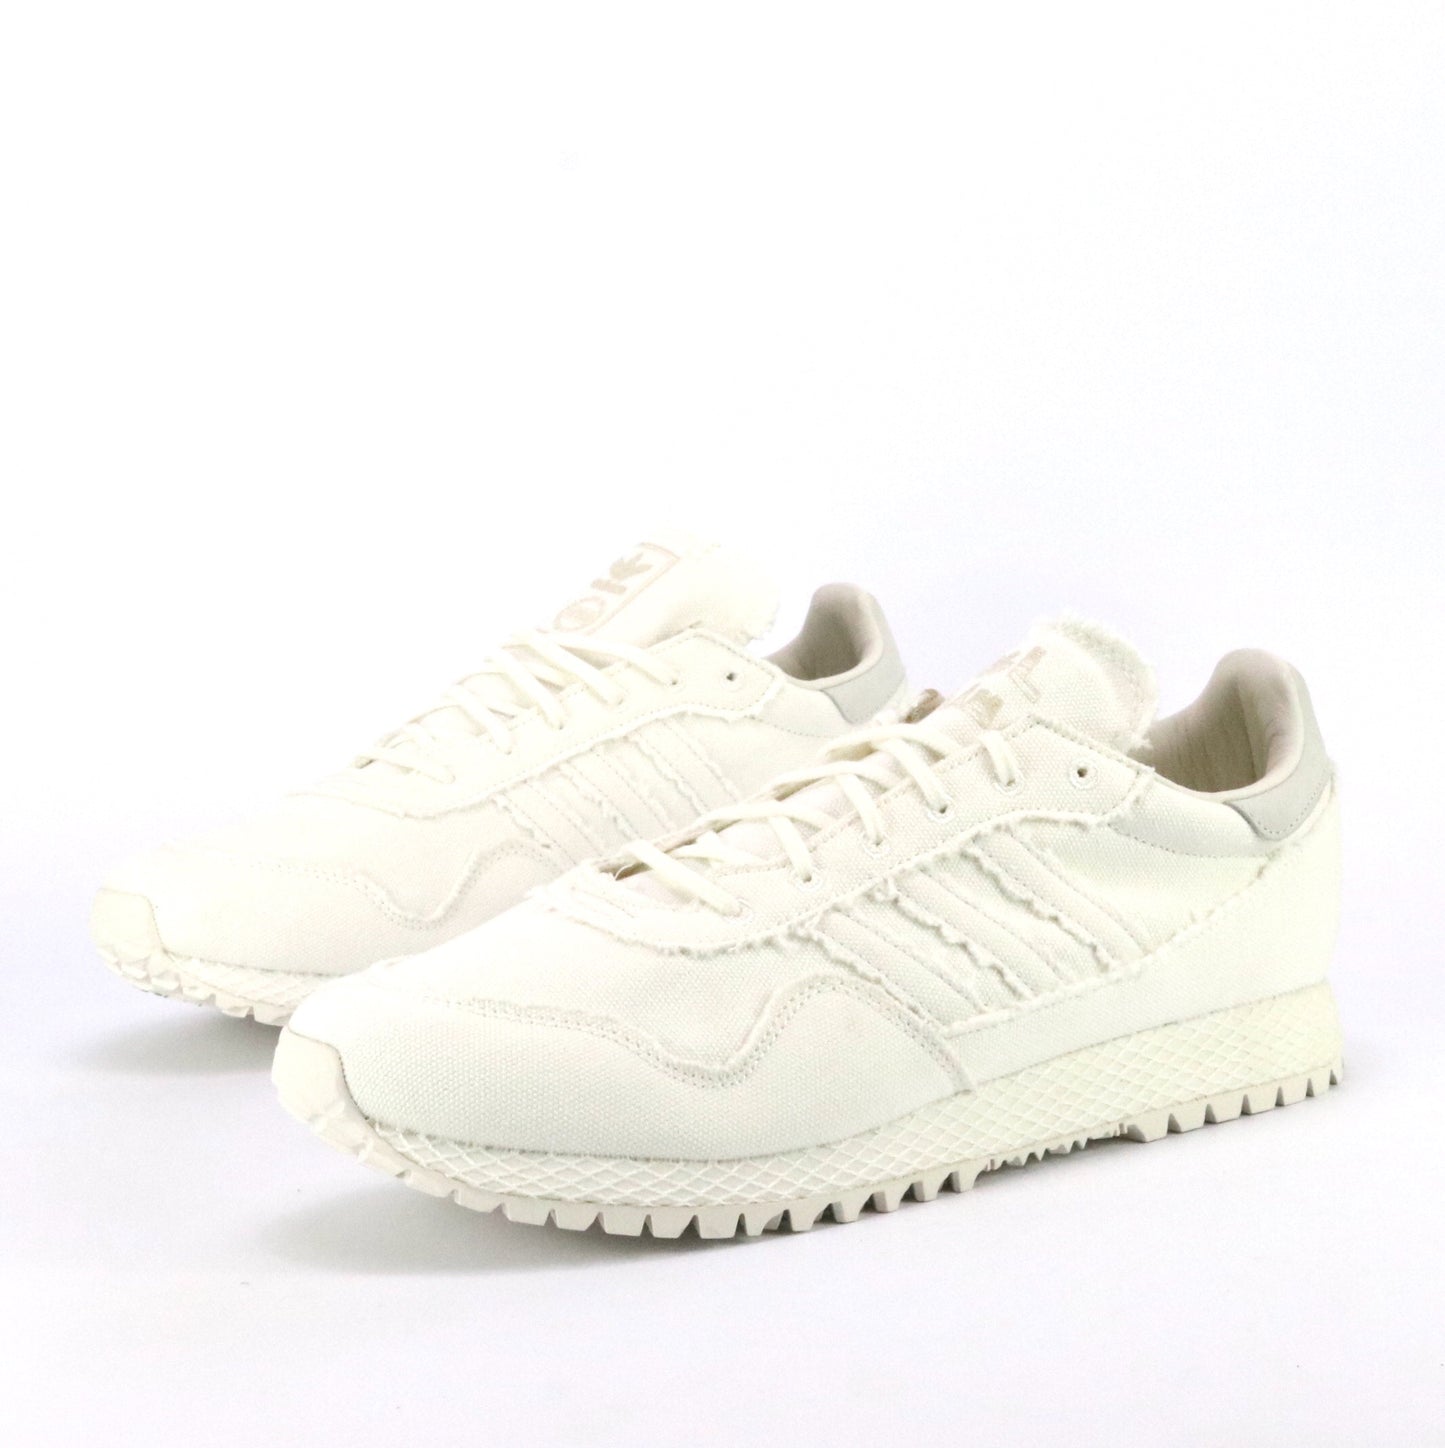 Adidas EQT Support Ultra PK Vintage White